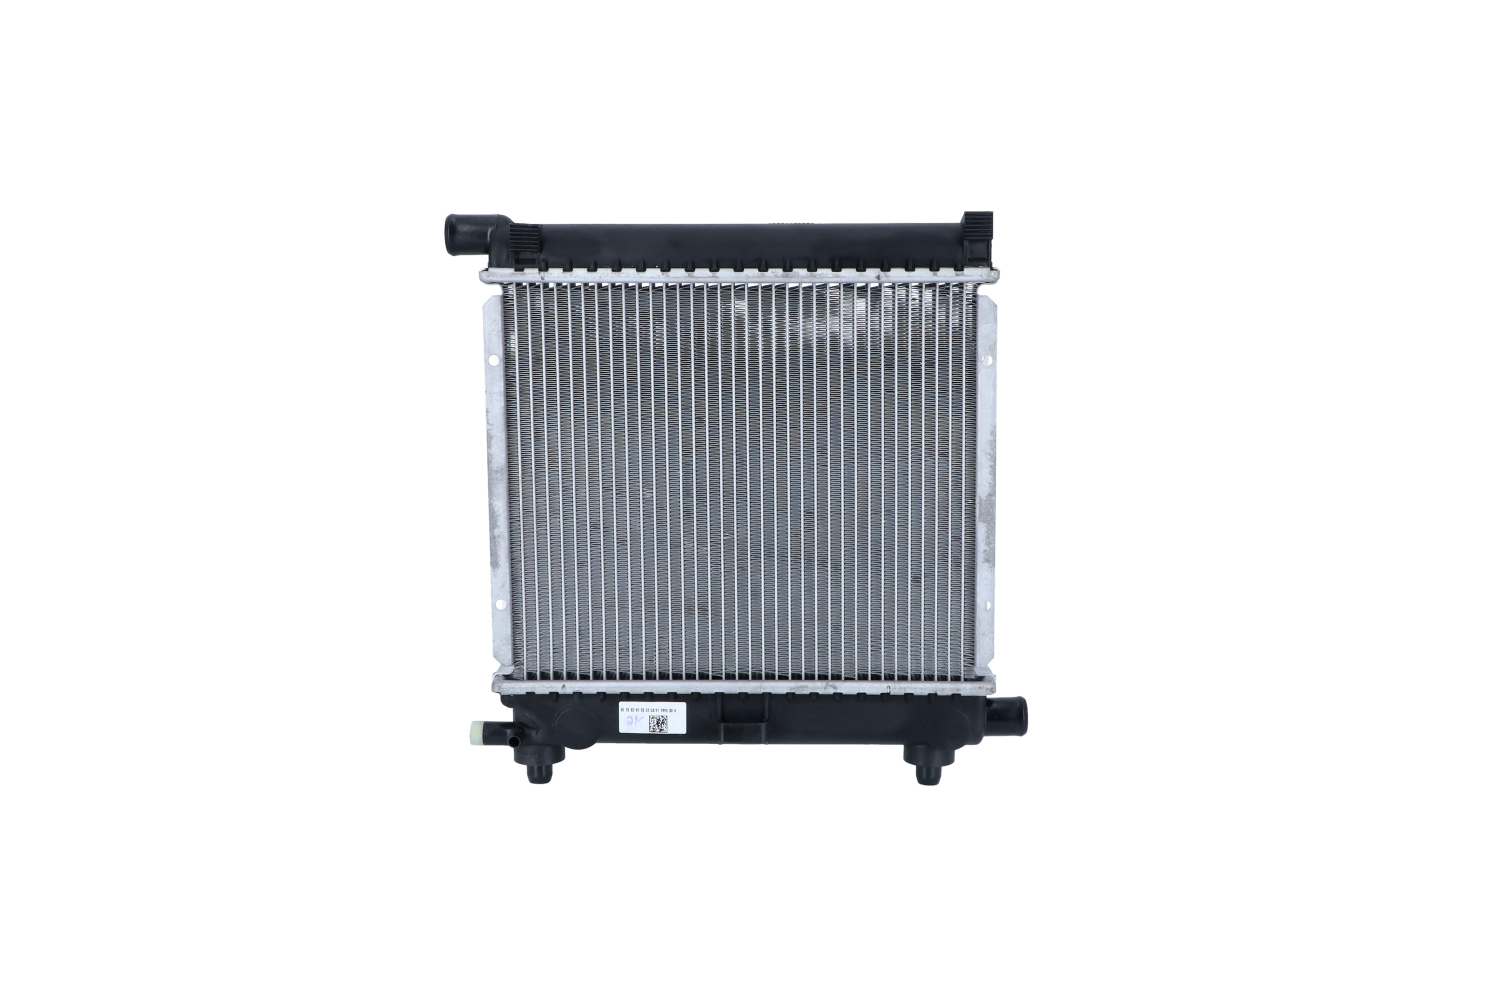 NRF 507662 Engine radiator Aluminium, 346 x 293 x 42 mm, with mounting parts, Brazed cooling fins